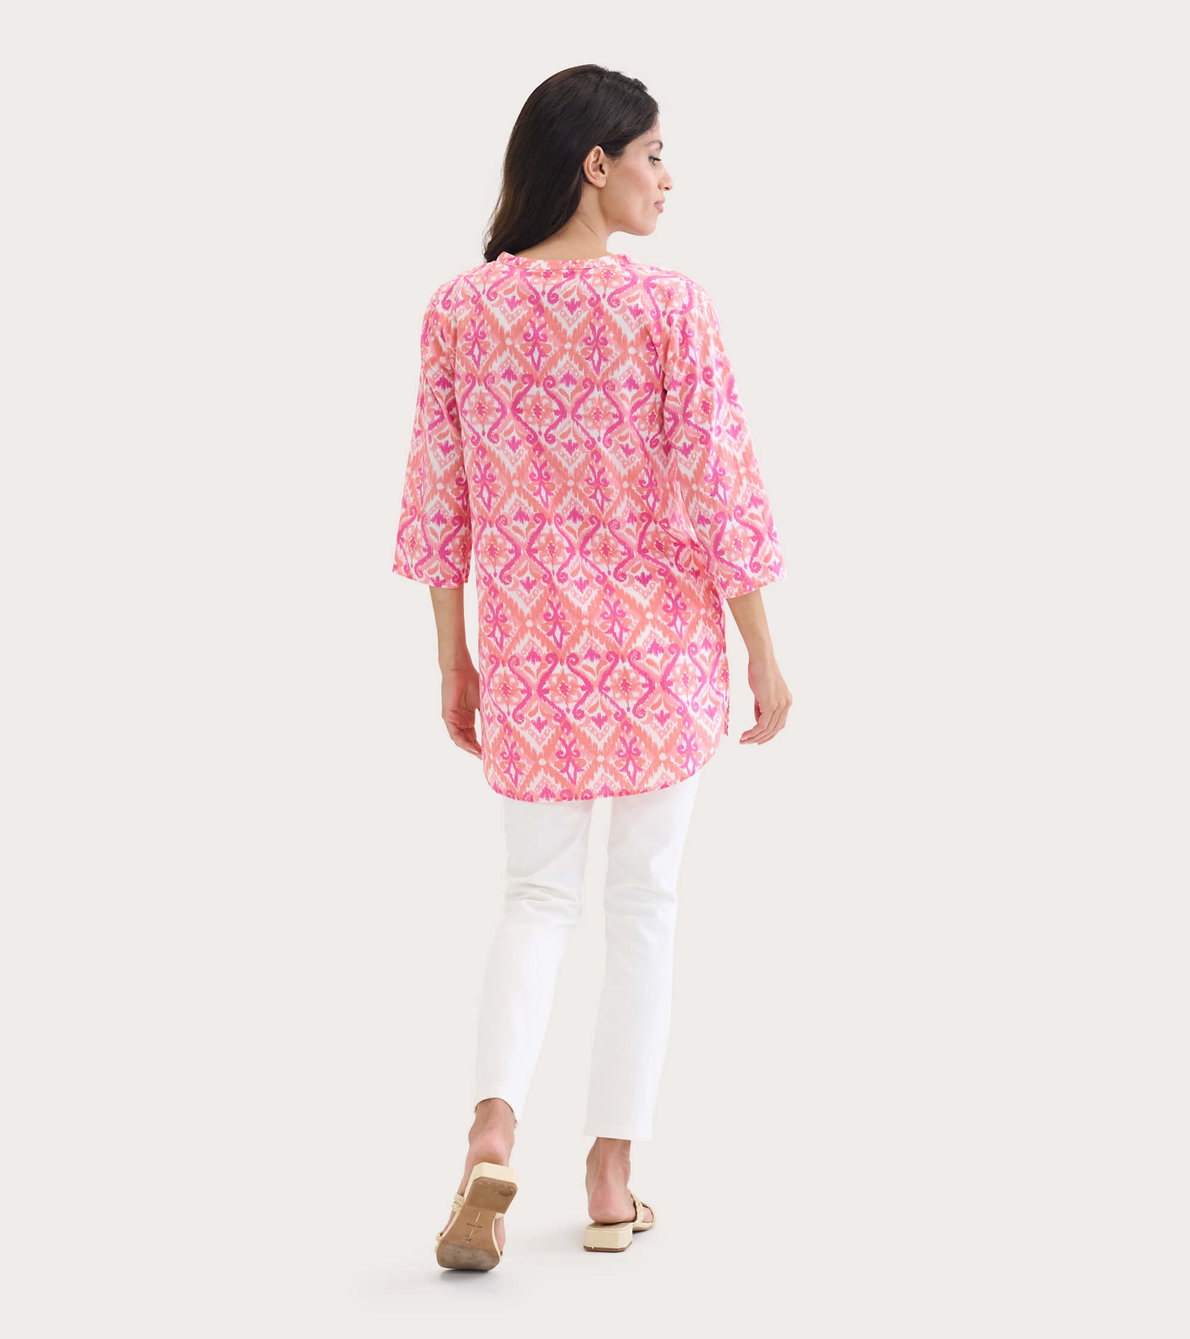 View larger image of Women's Sunset Ikat Delray Beach Tunic